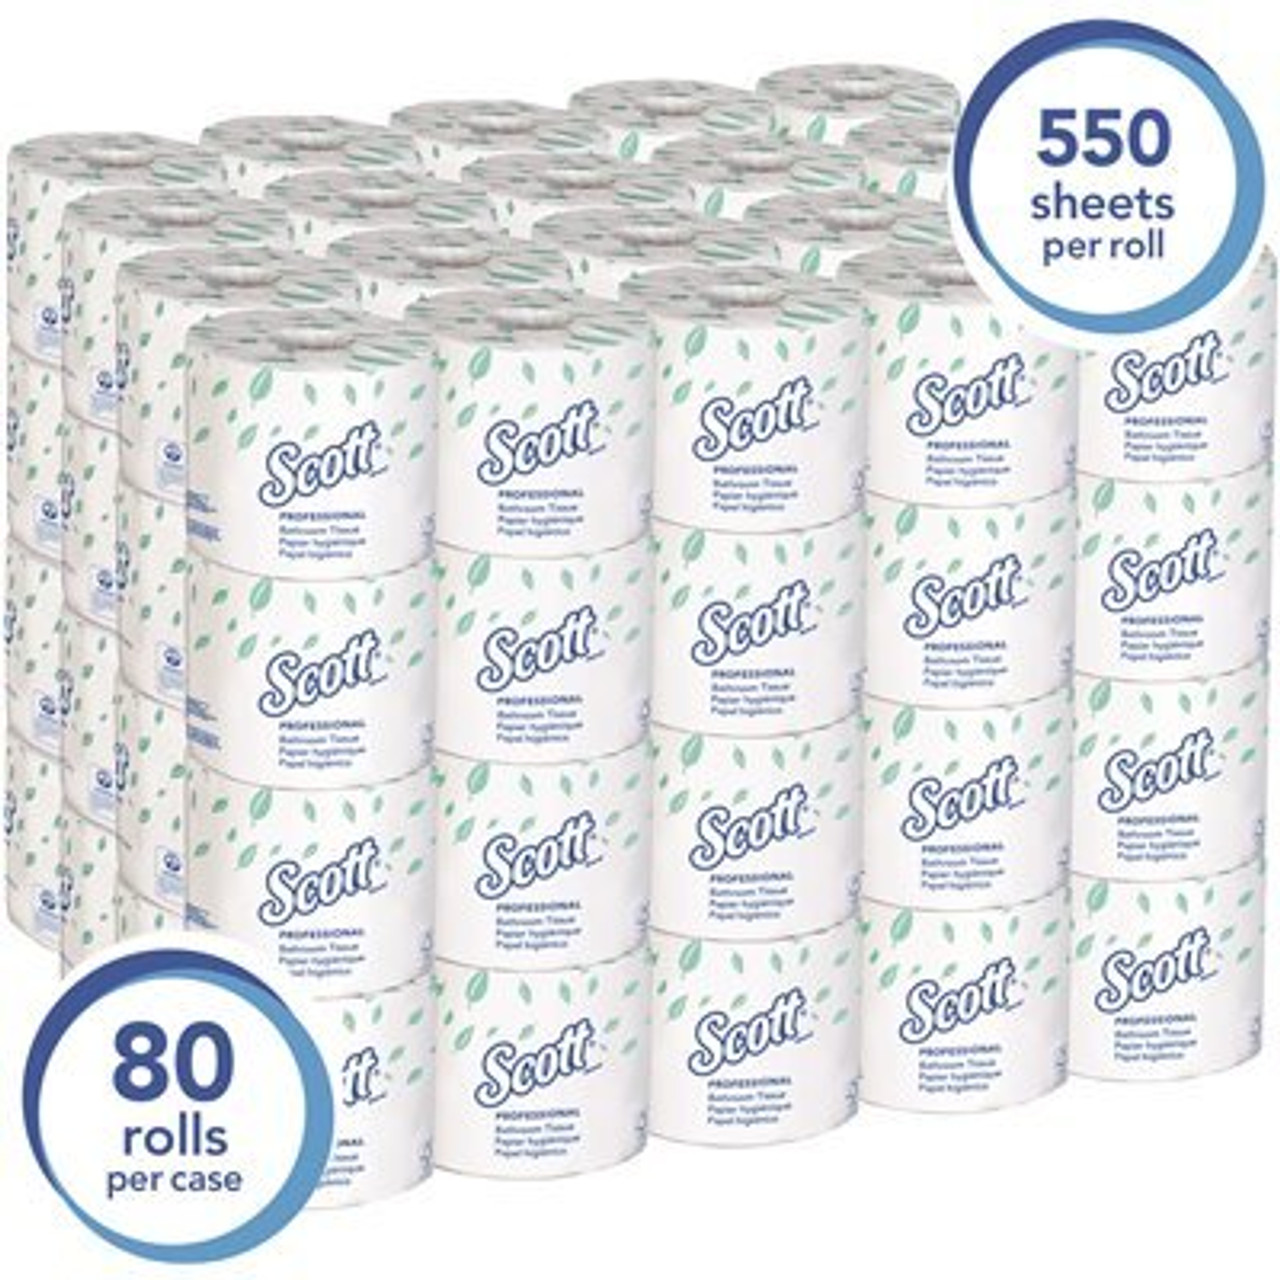 80 Individually Wrapped Rolls of Scott Toilet Paper 